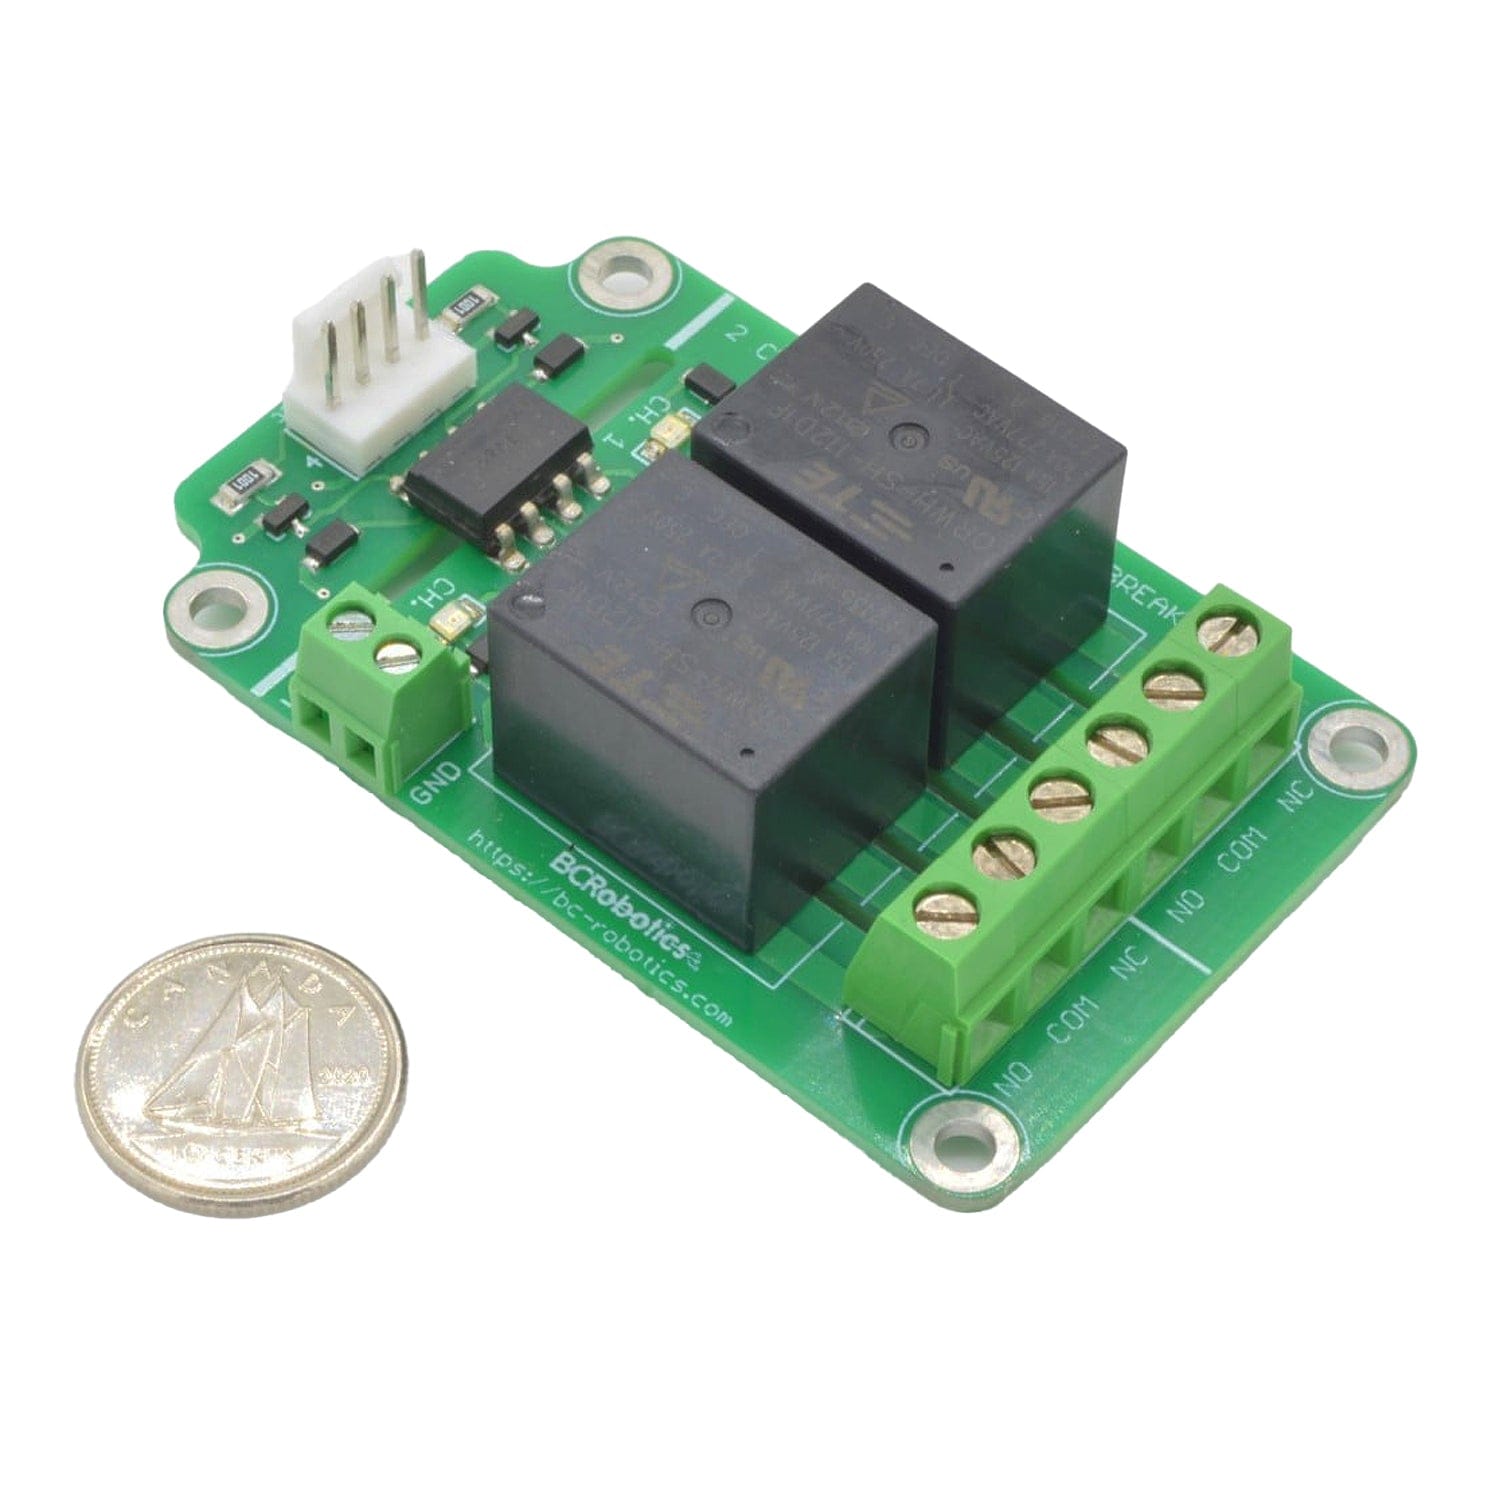 2 Channel Isolated Relay Breakout – 5V - The Pi Hut